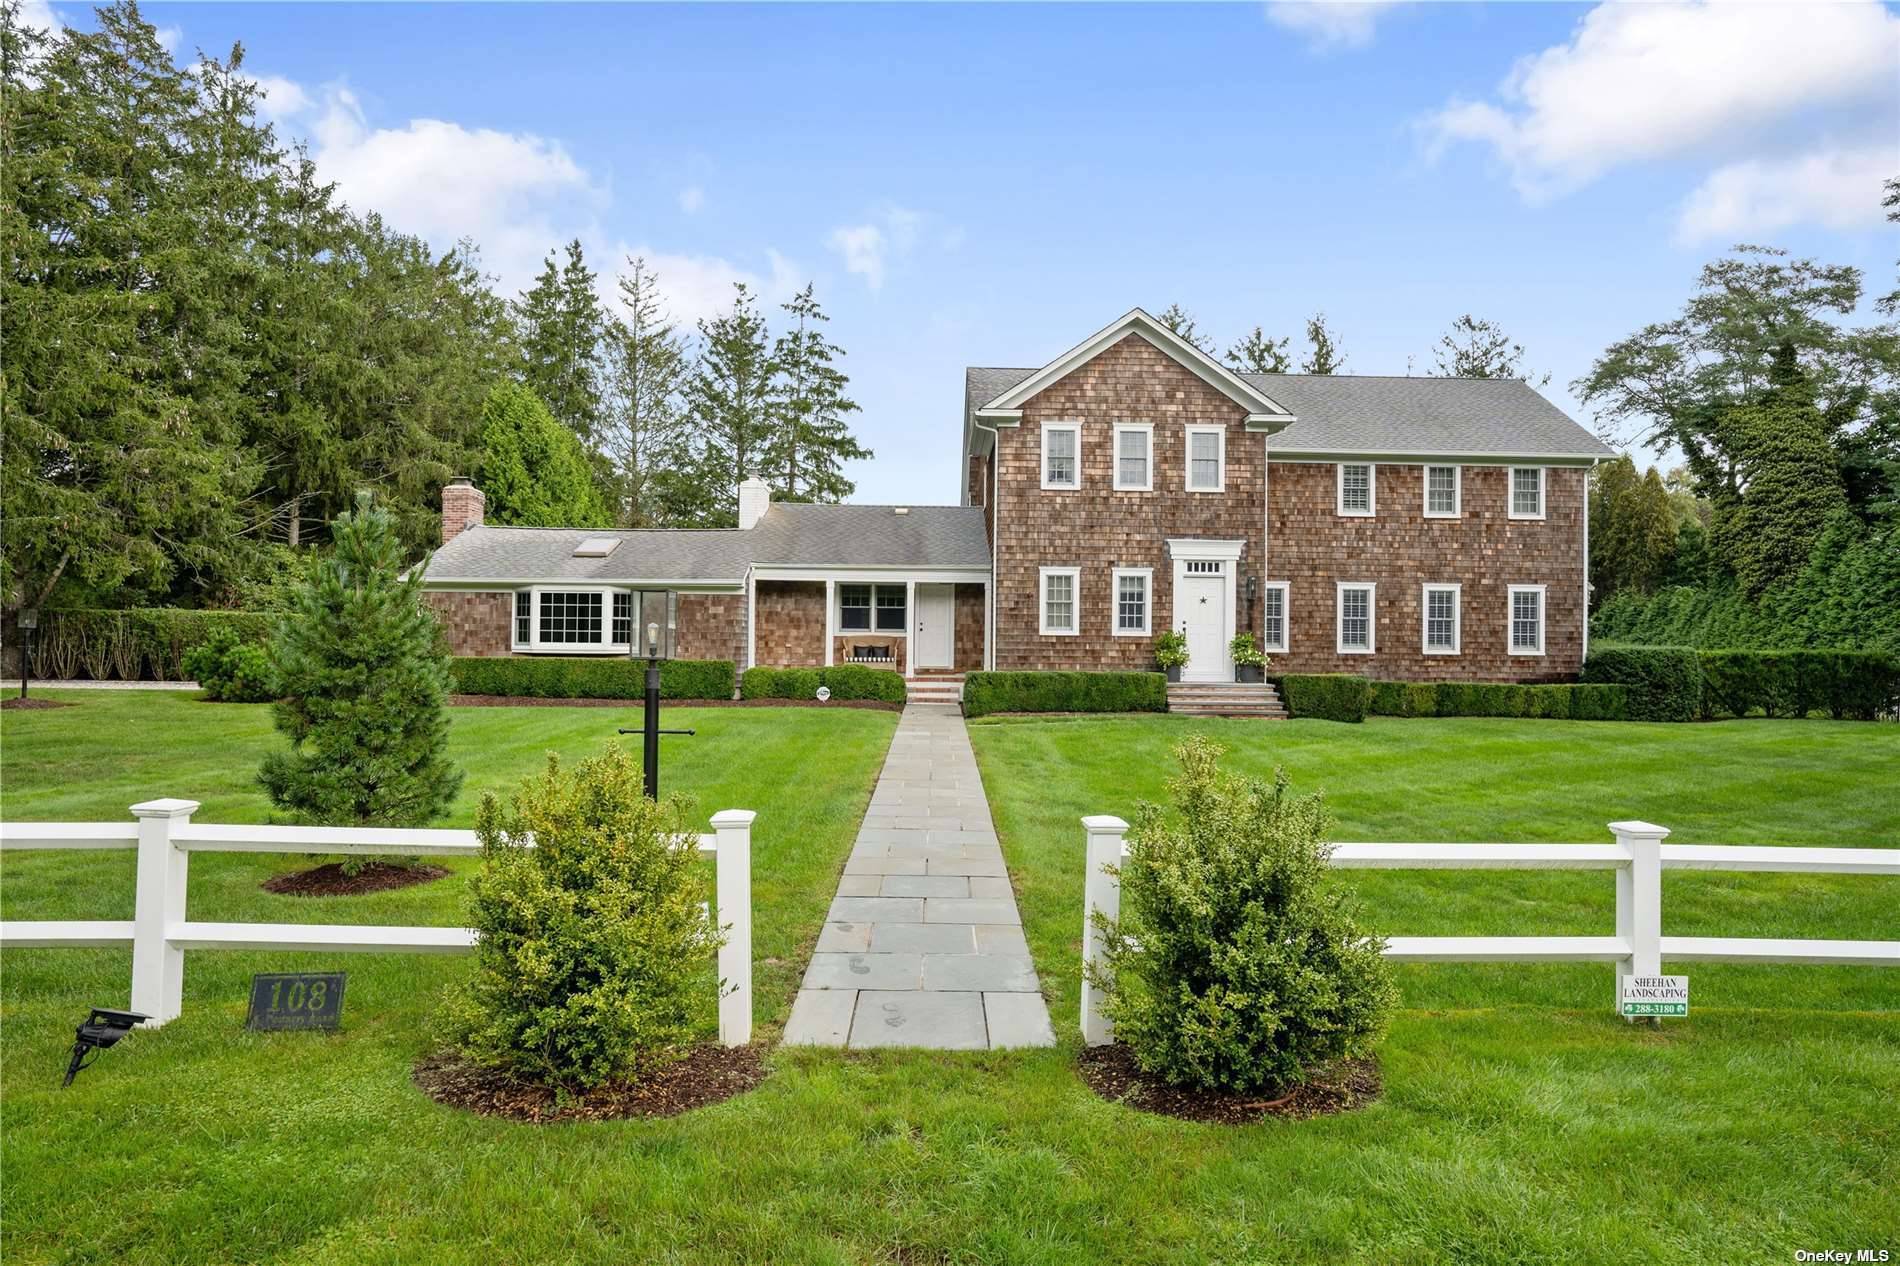 Nestled on one plus acres with mature landscaping and shade trees, this newly updated country estate is a designer showcase.